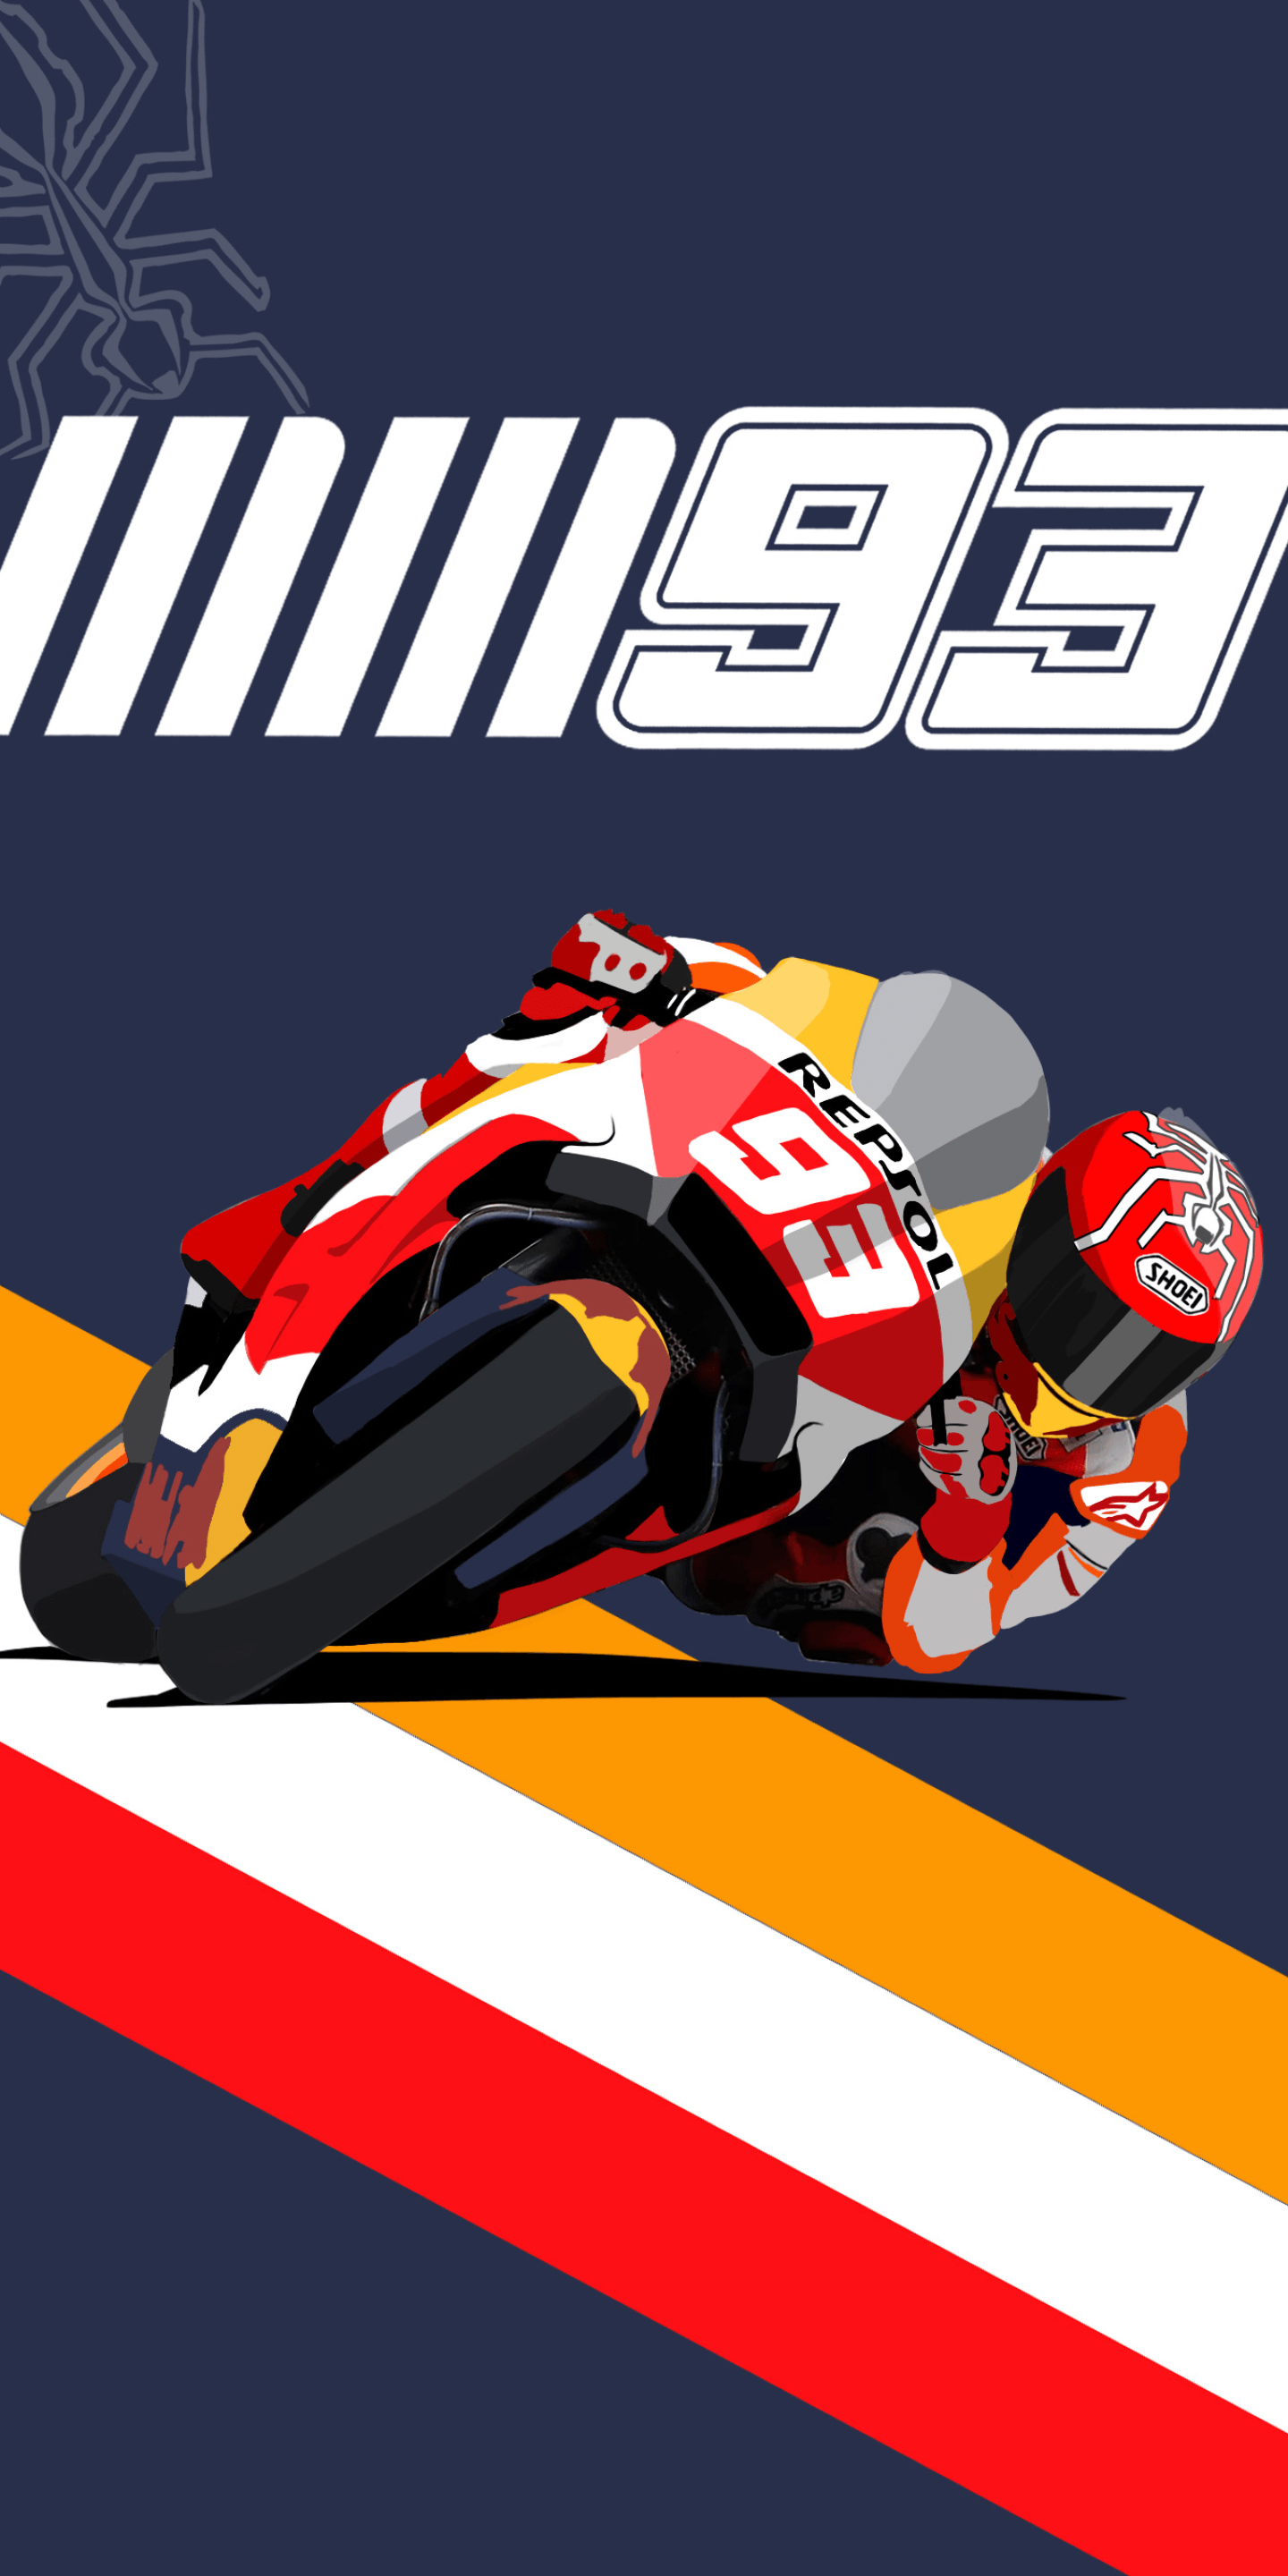 I did something today! MM93 wallpaper for all you Marquez fans out